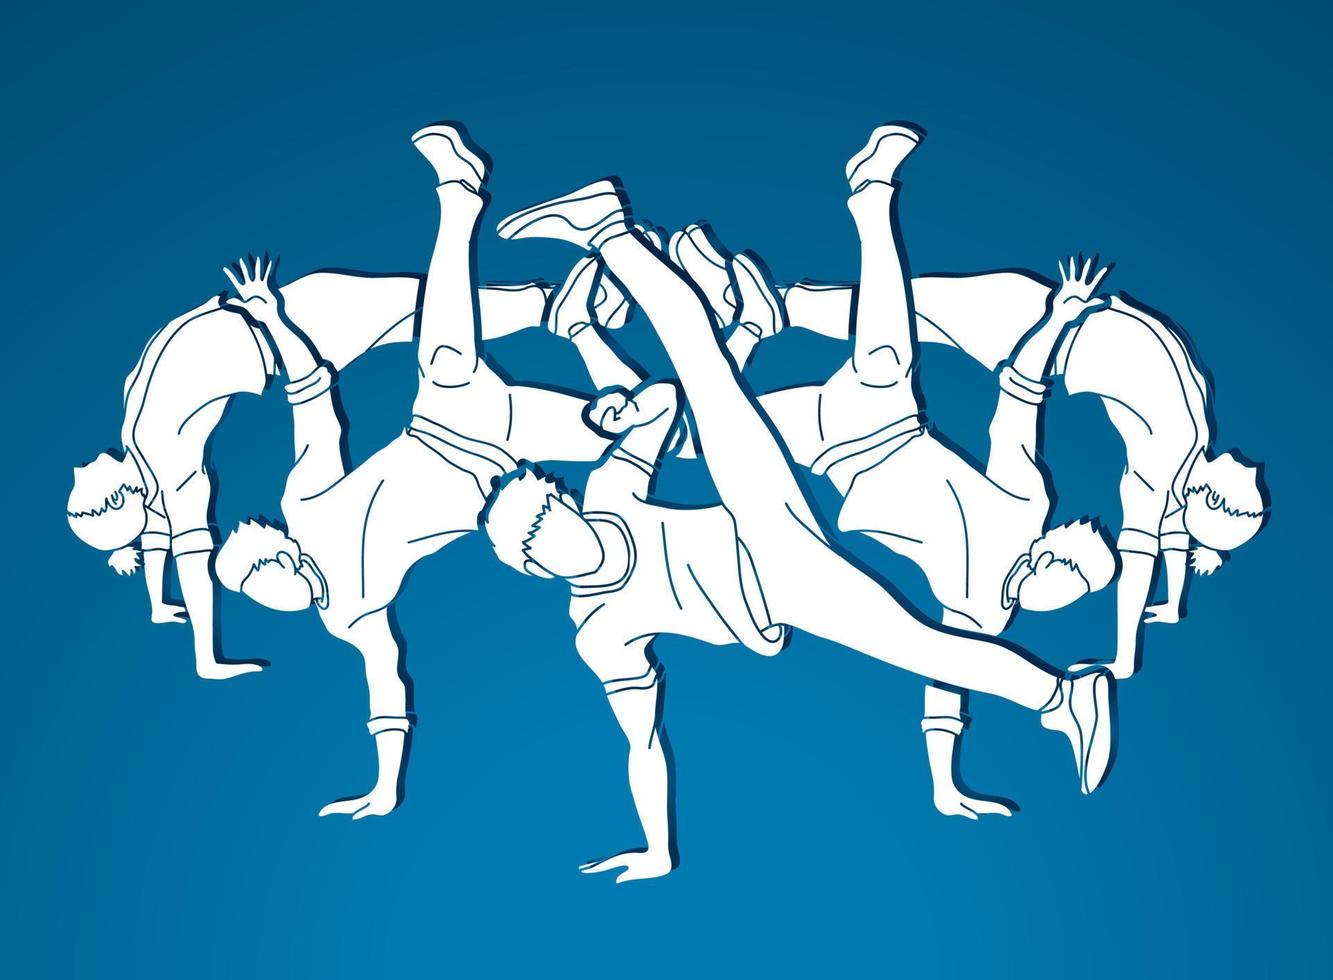 Group of People Dancing Together vector